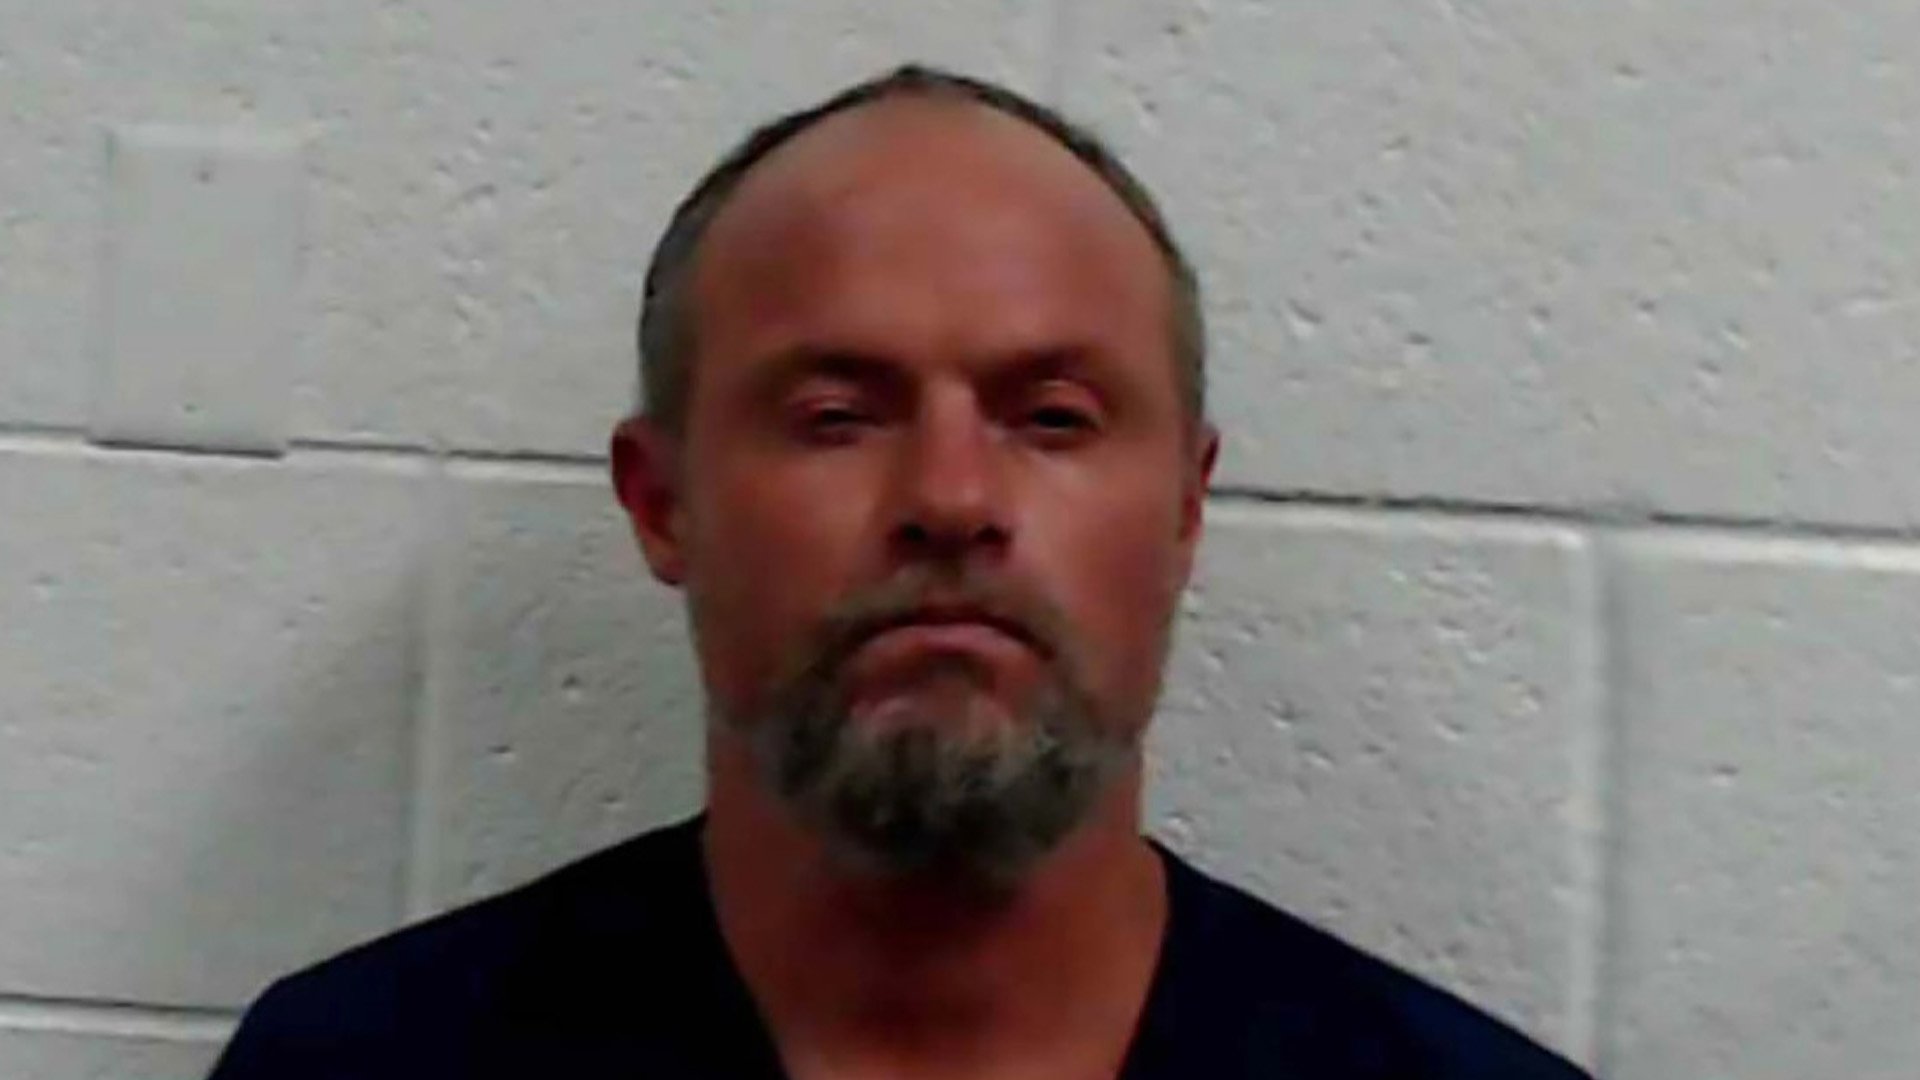 West Virginia authorities say James Dean Fowler, 50, threatened to blow up a federal courthouse and a Bluefield church on Monday, Aug. 22, 2022. West Virginia Regional Jail and Correctional Facility Authority photo.